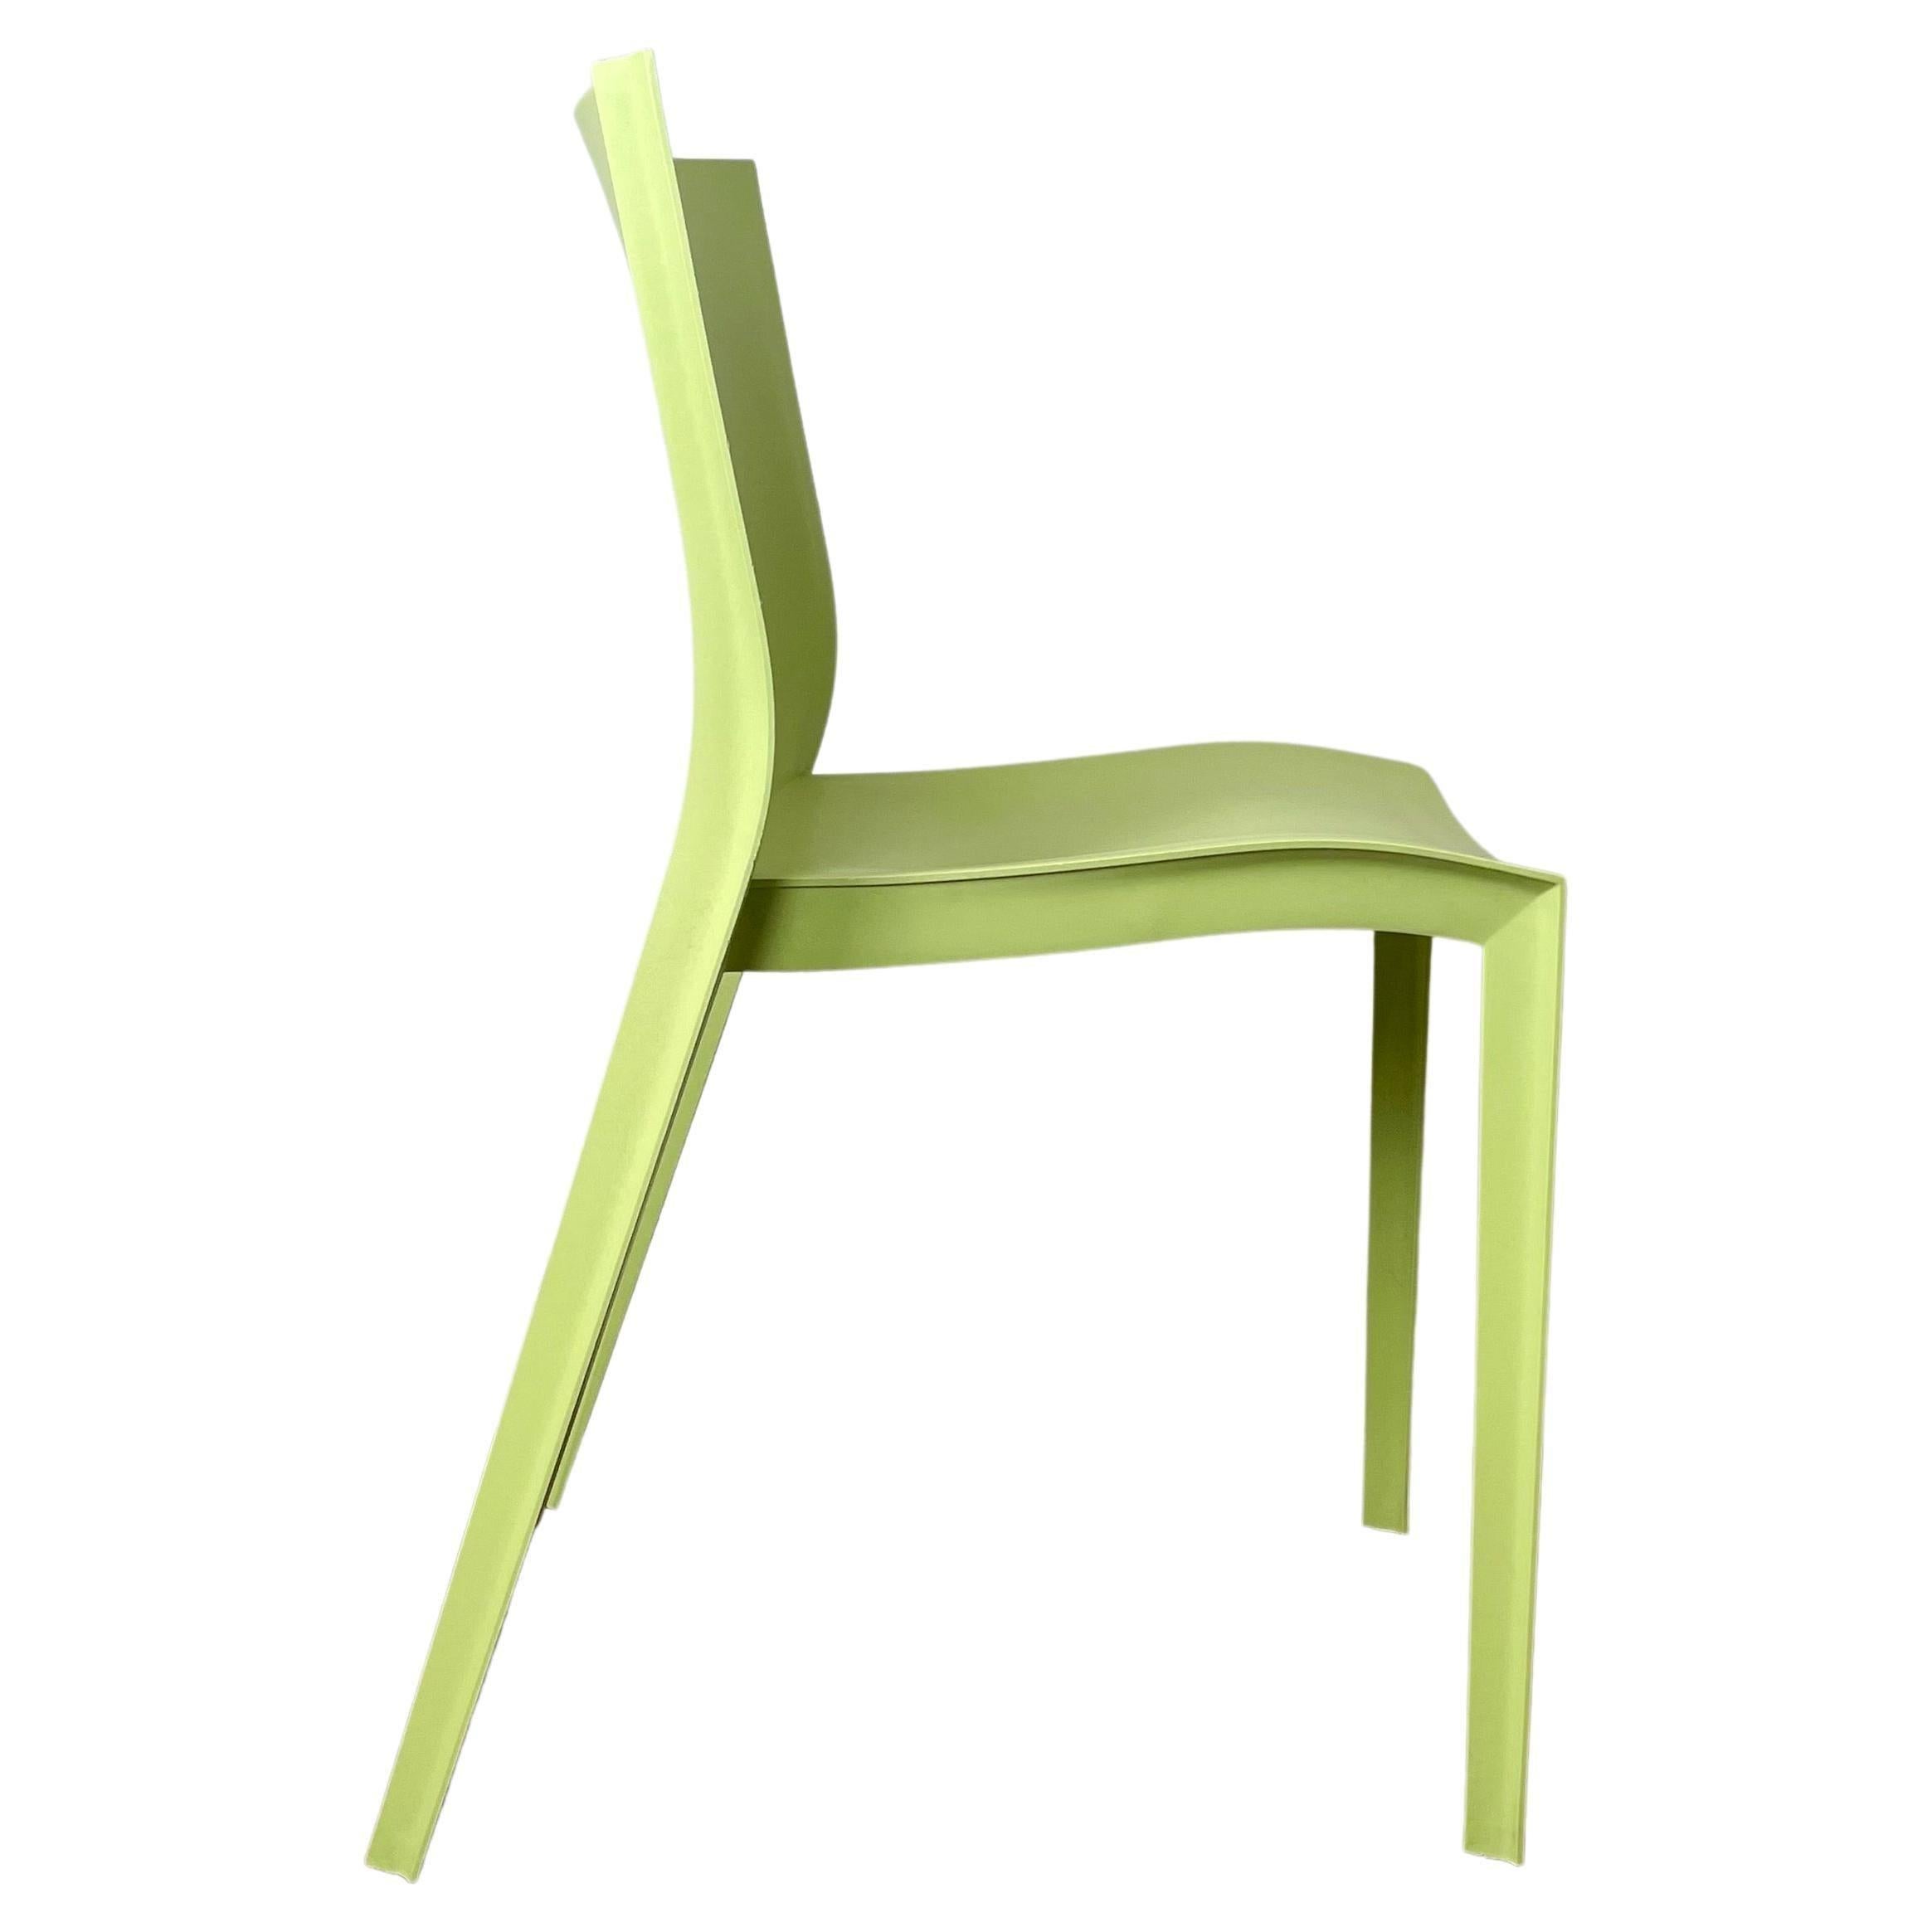 Late 20th Century Philippe Starck, Set of 2 French Green Chairs, Design Slick Slick XO - France For Sale